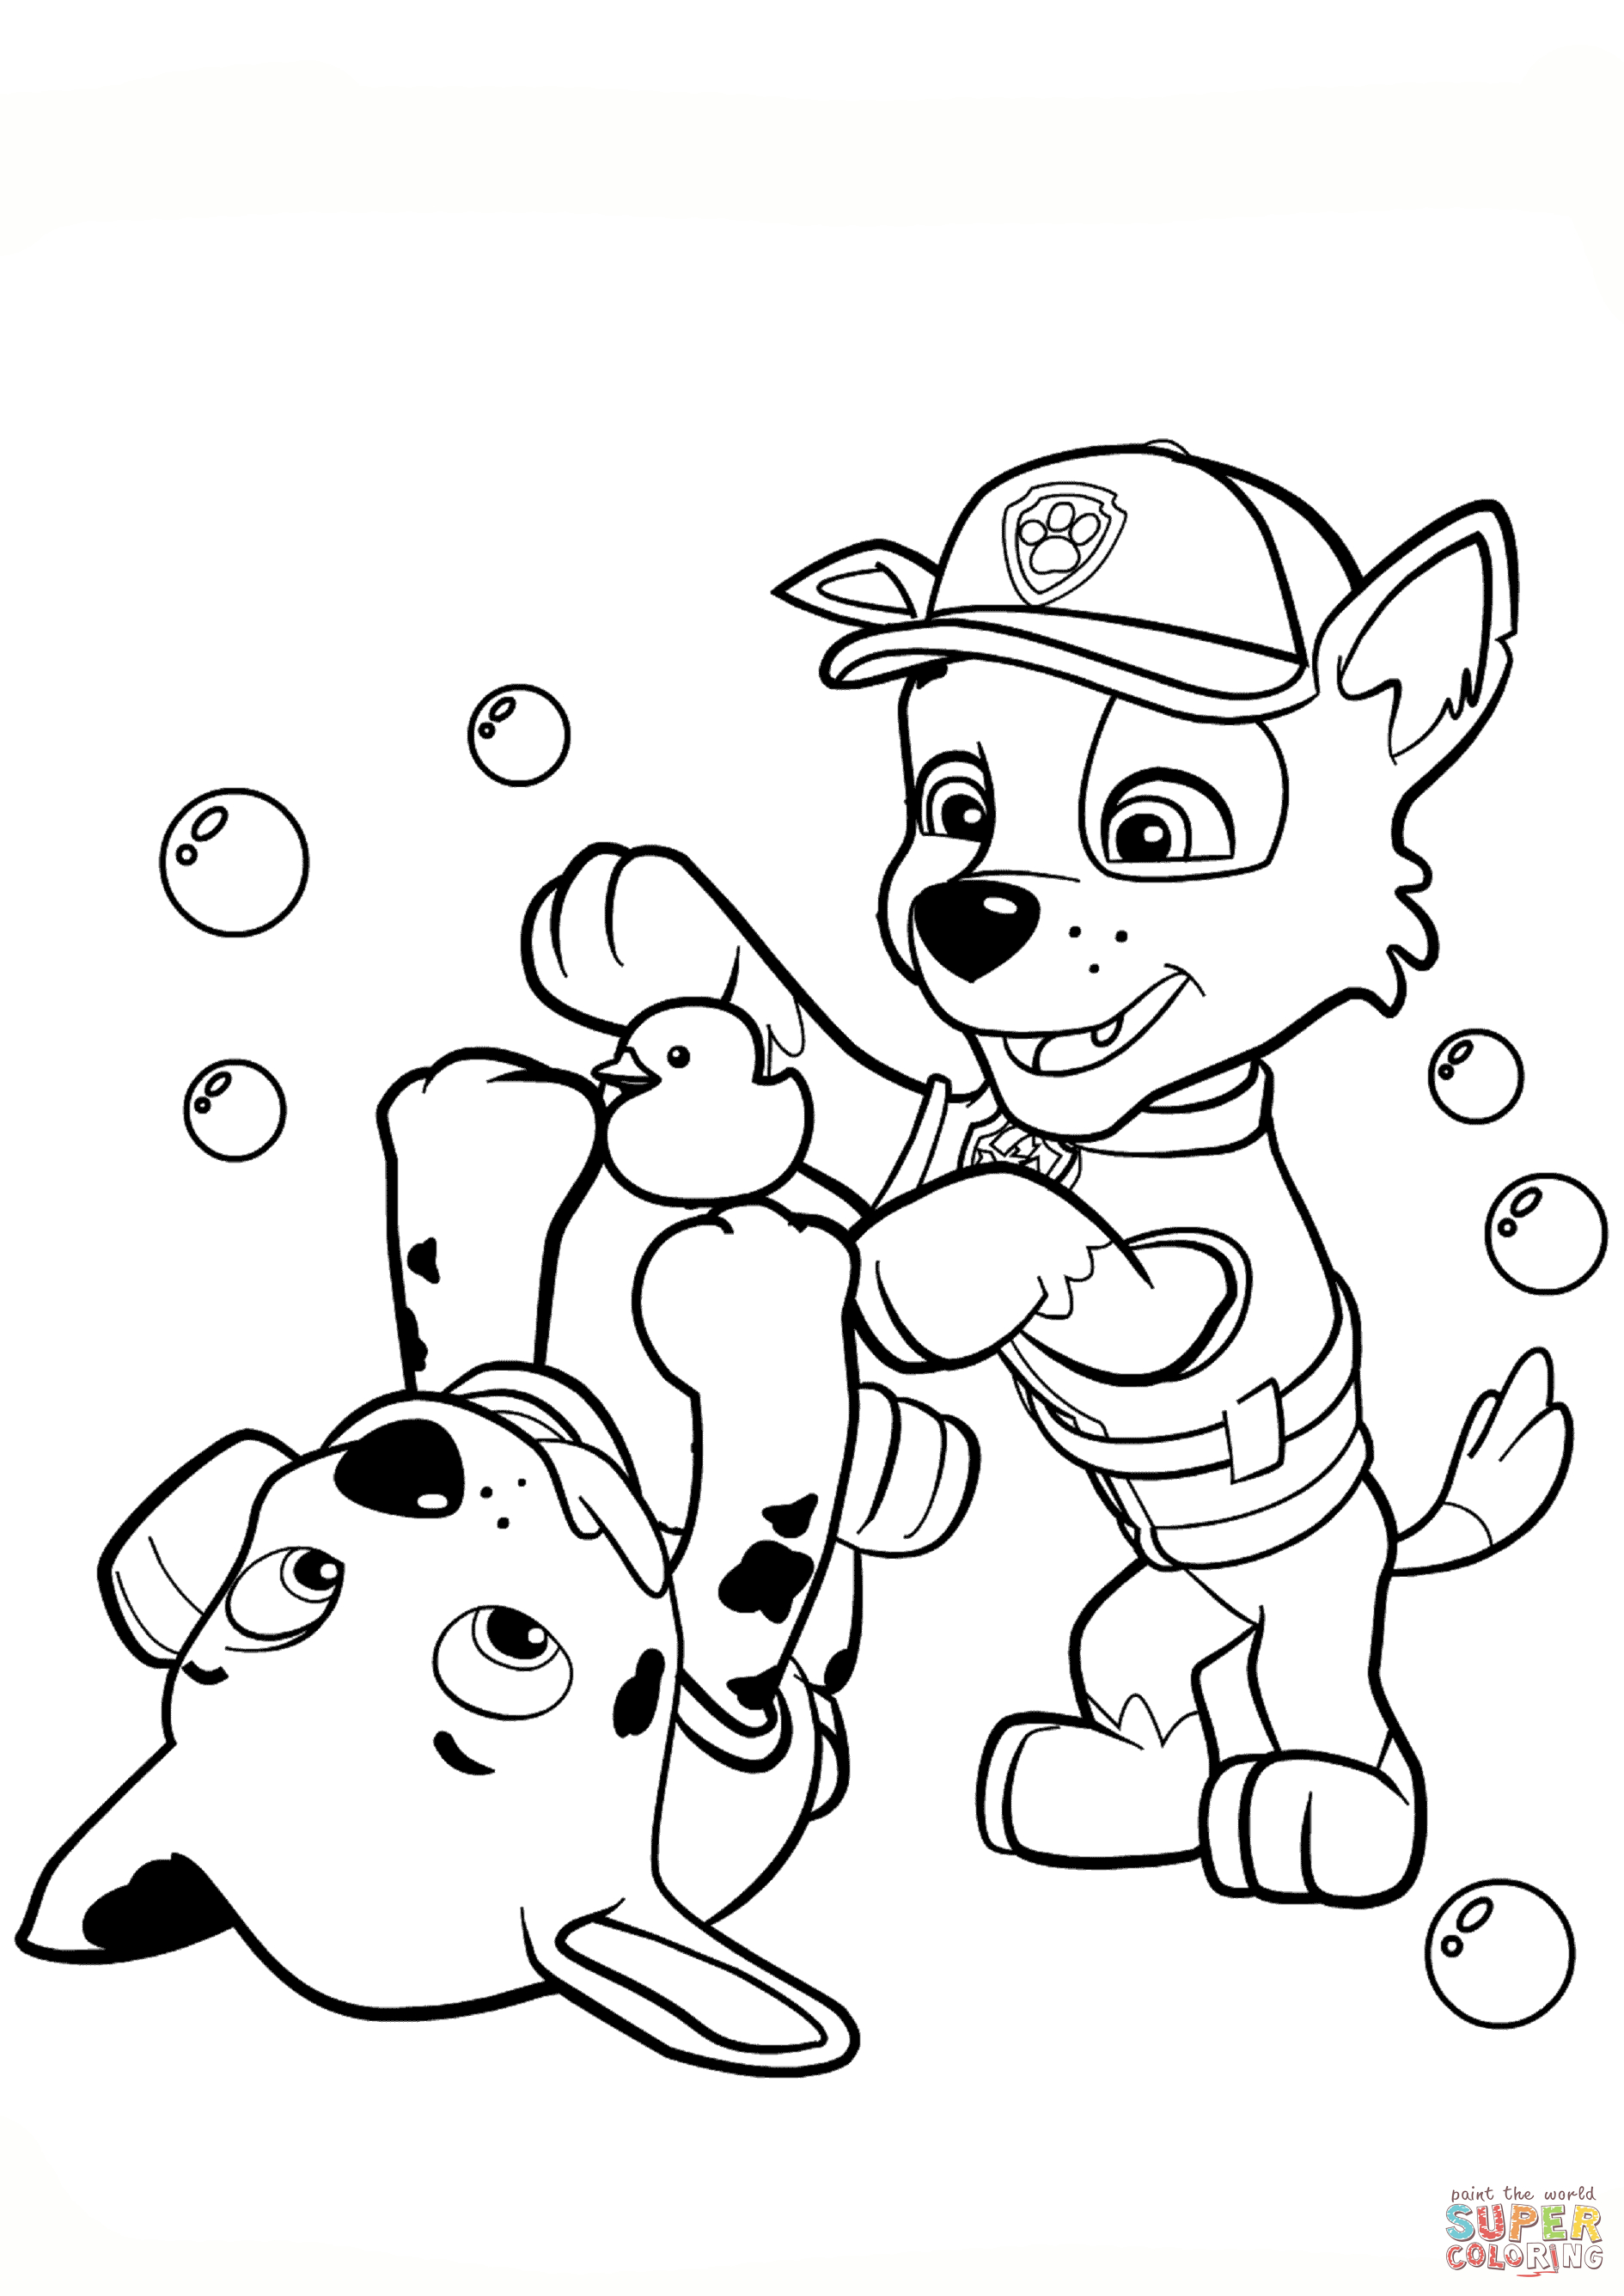 Coloring Ideas : Paw Patrol Rocky And Marshall Coloring Page - Free Printable Paw Patrol Coloring Pages